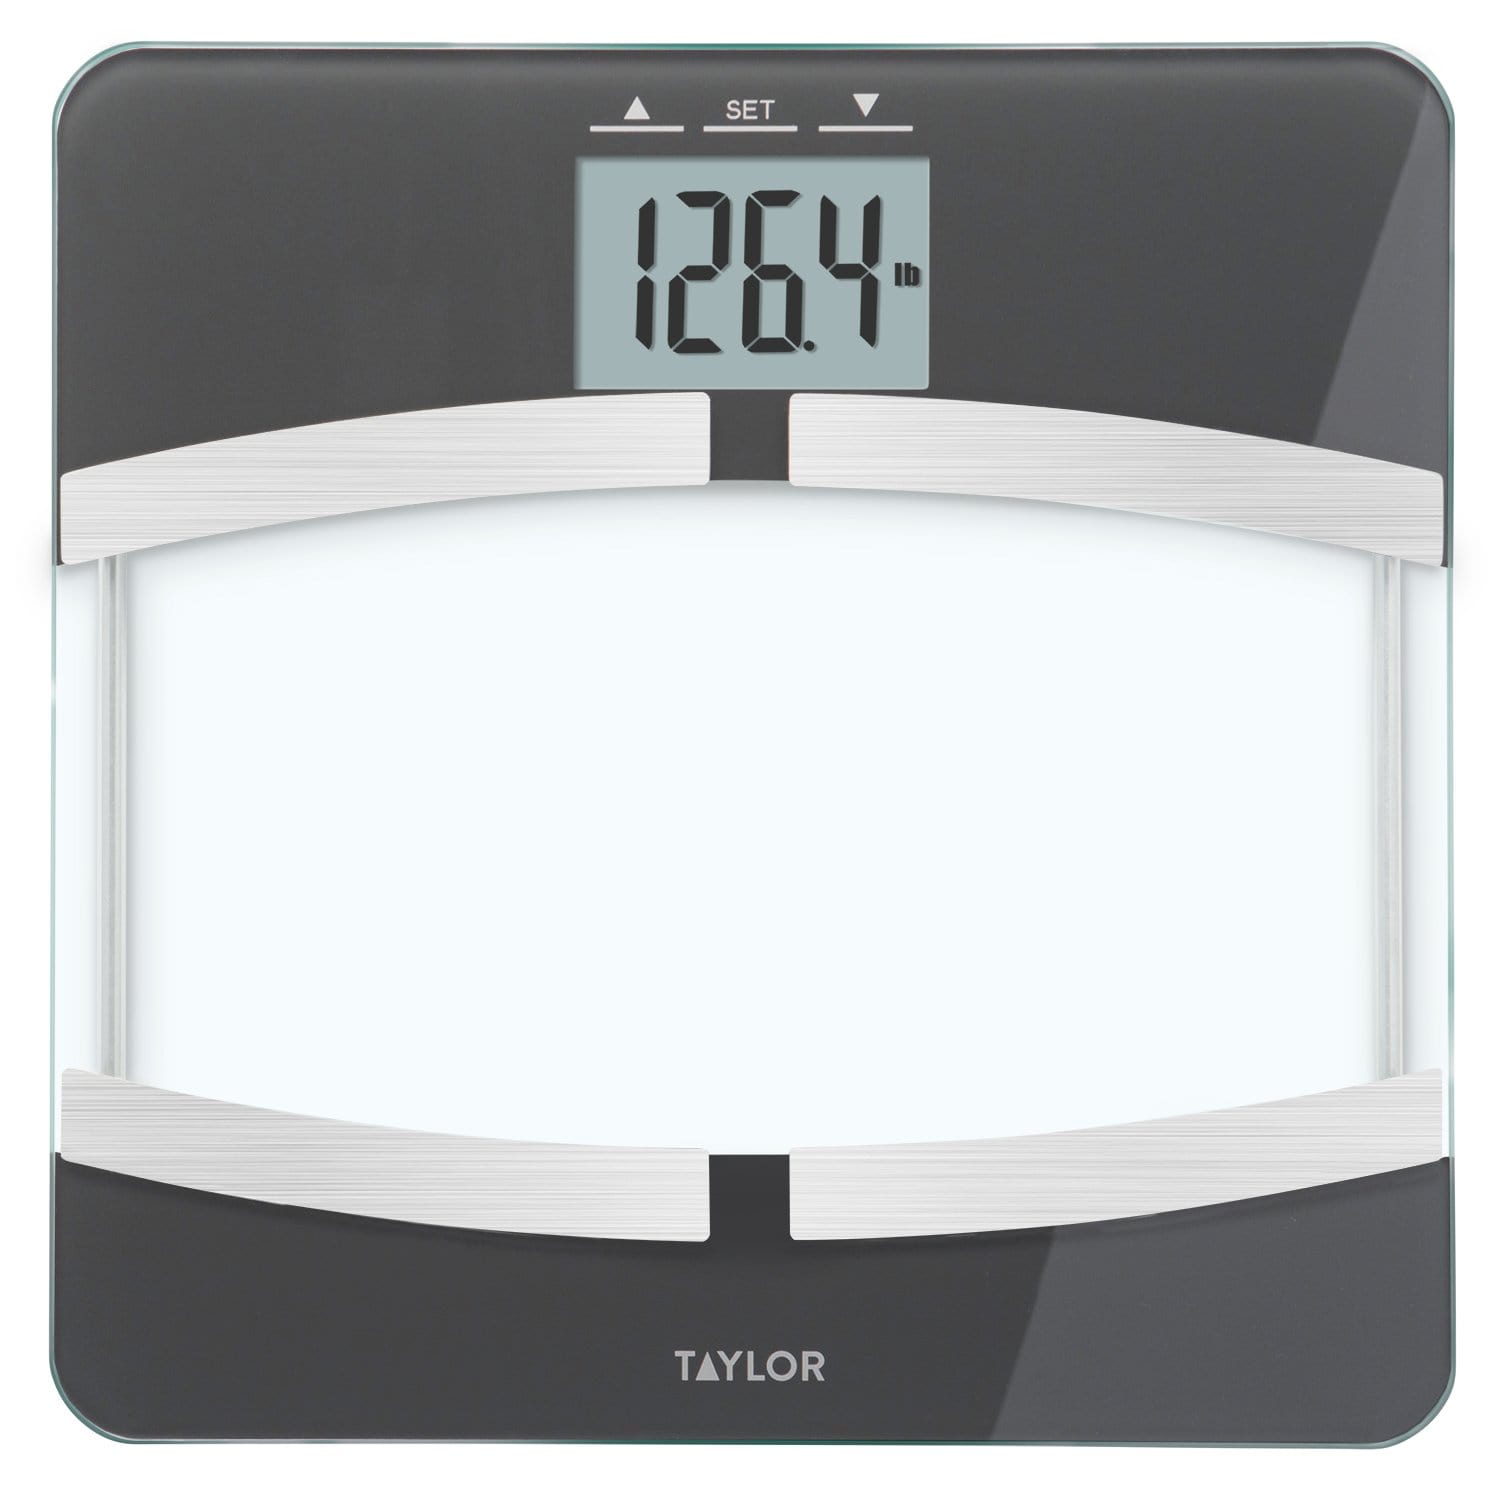 Taylor 5582 Wireless Body Fat Analyzer and Scale with Removable Display